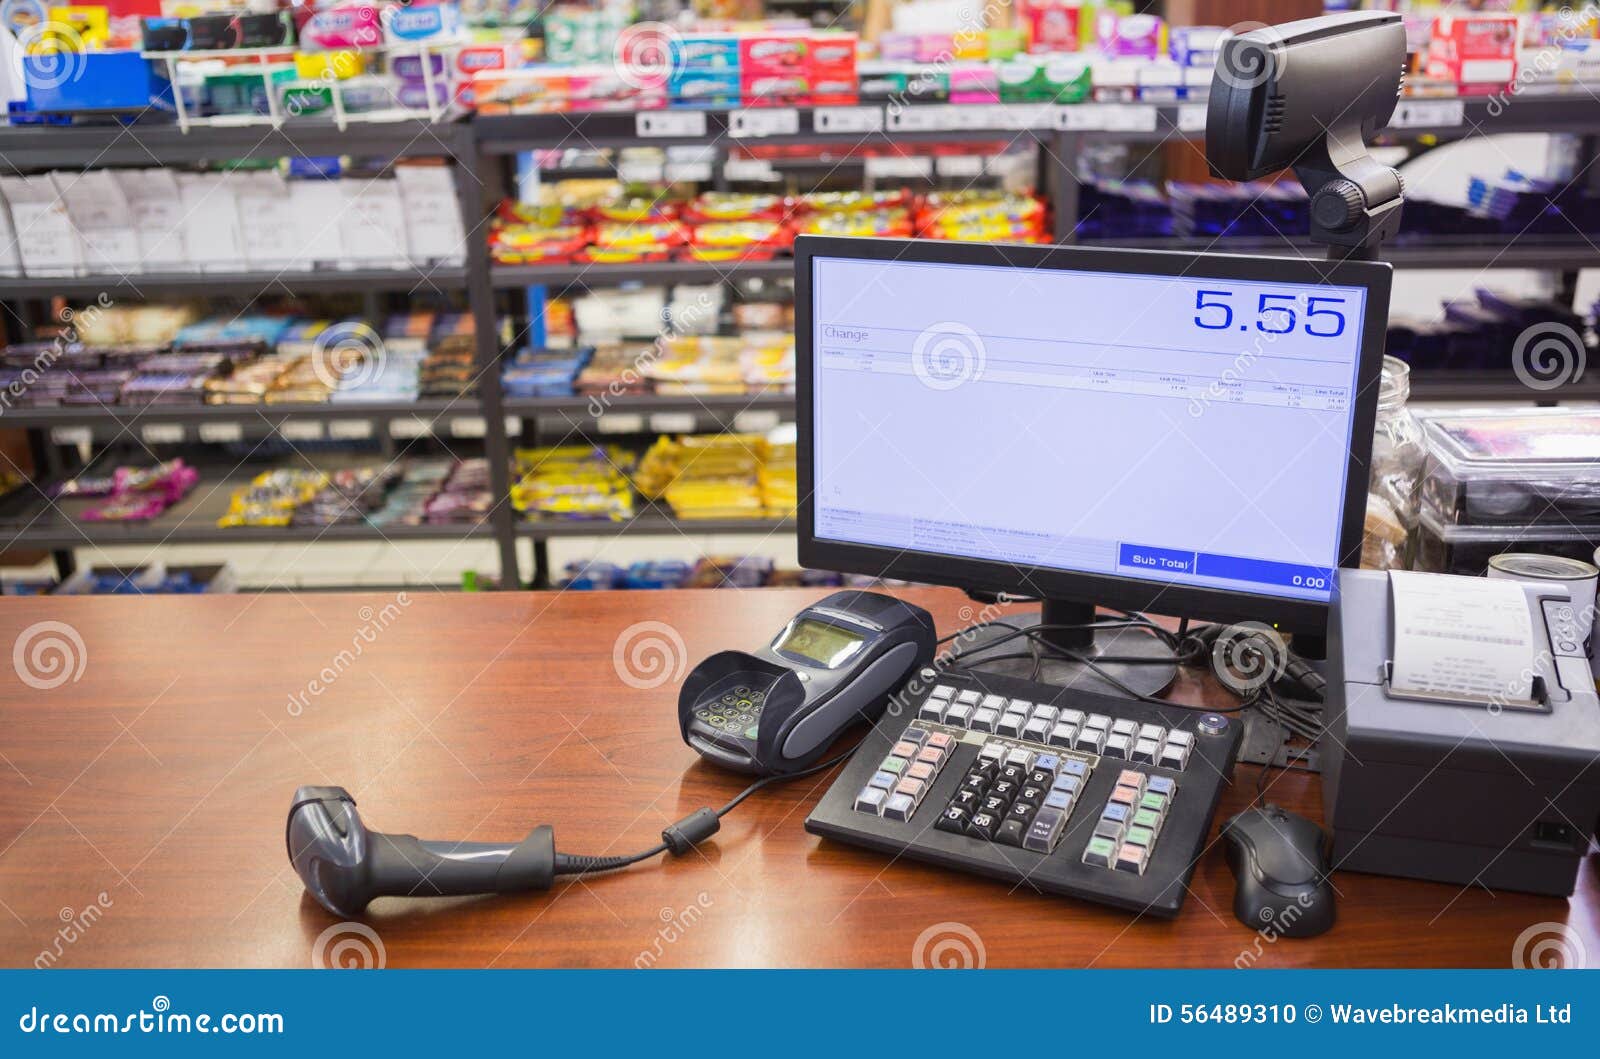 Cash Register On Wooden Table Stock Photo - Image: 56489310